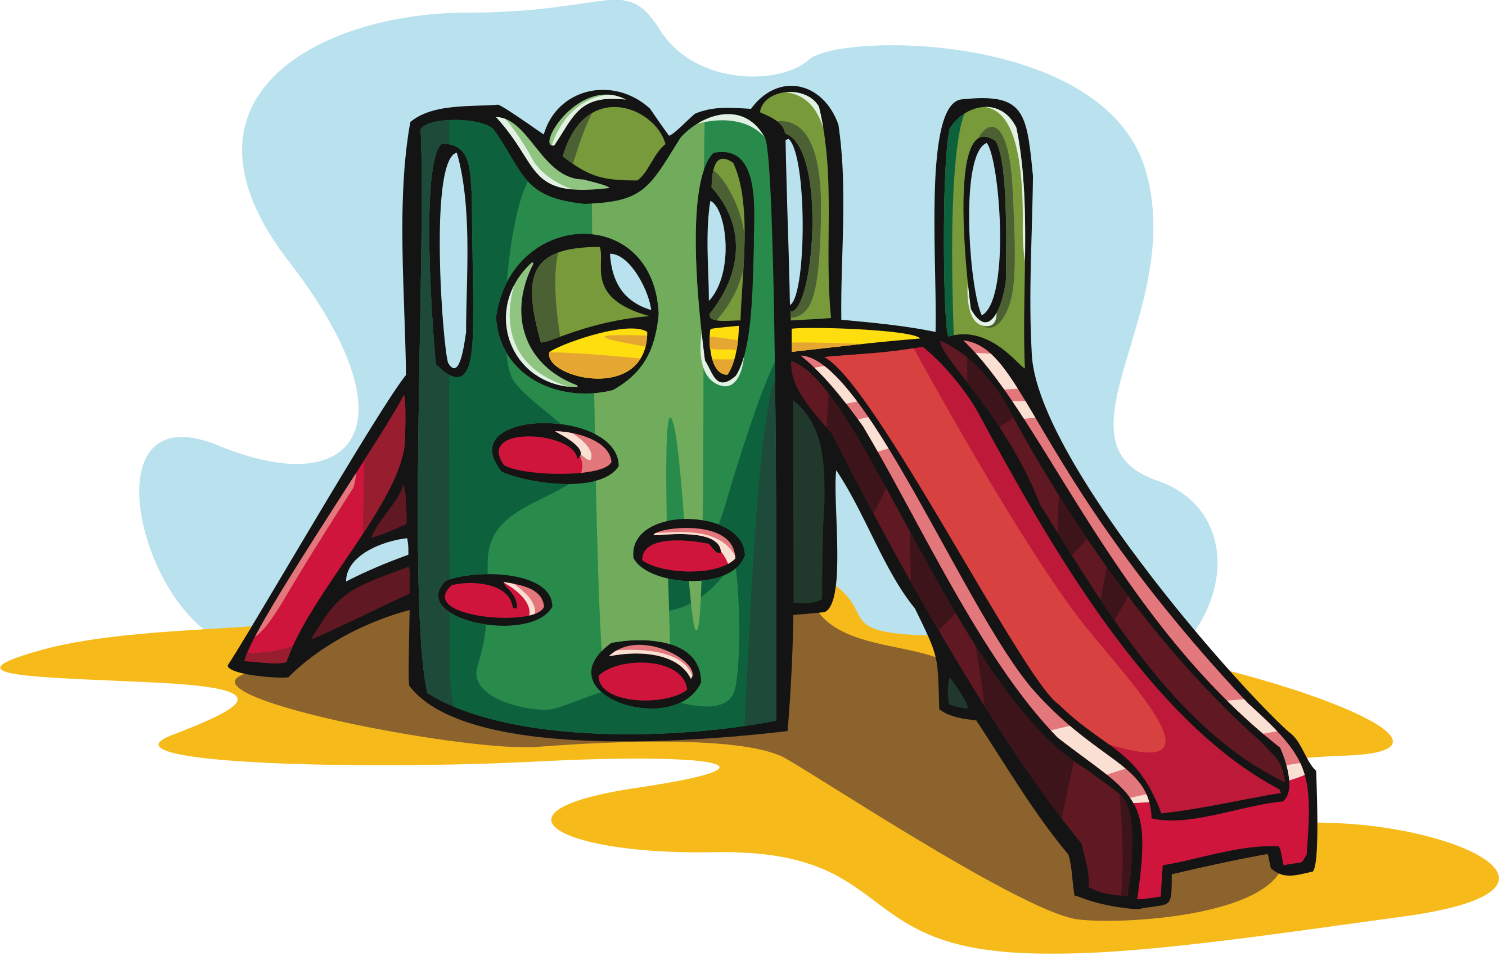 Playground clipart clipart 2